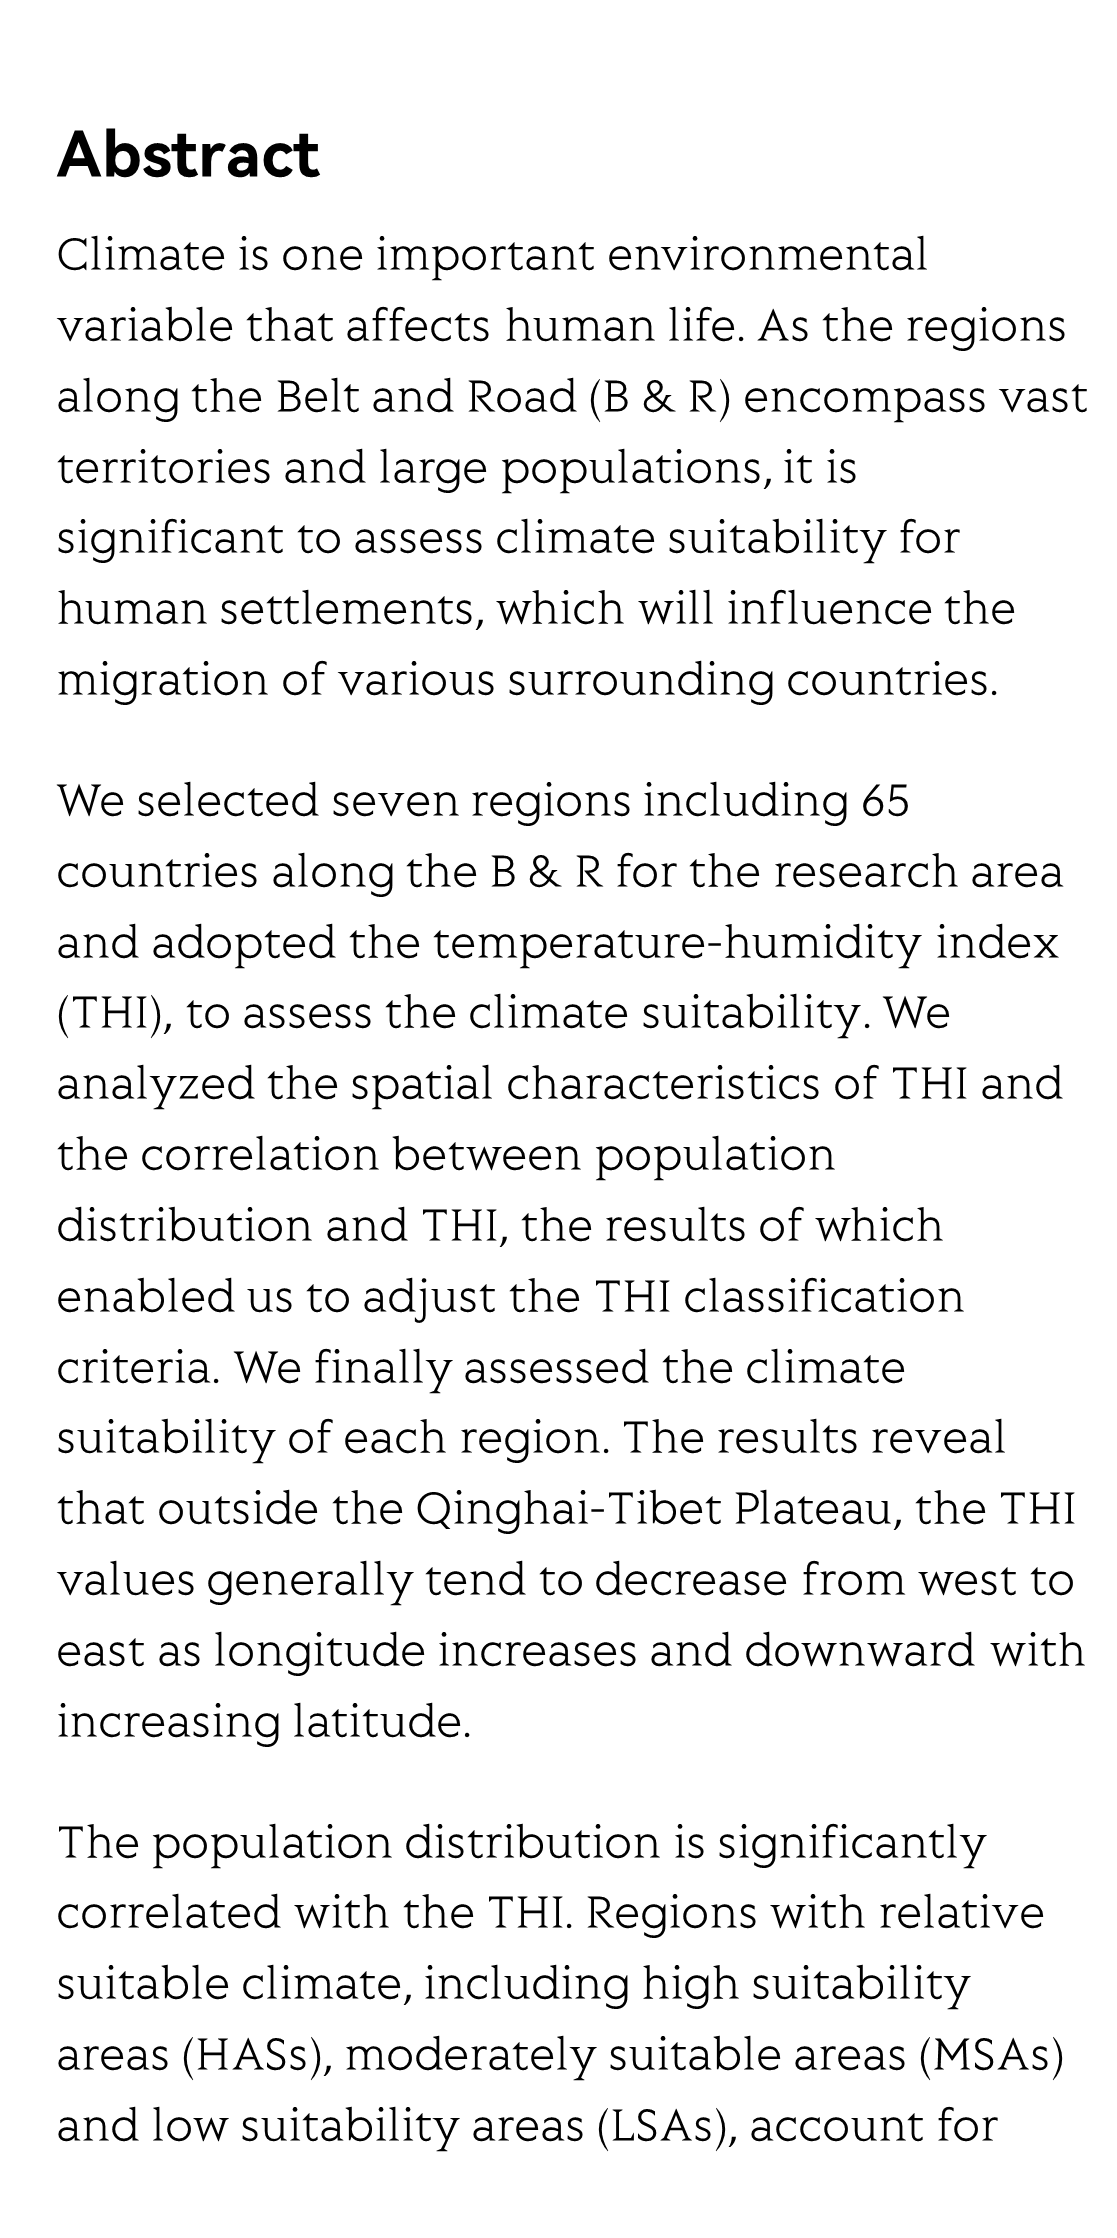 Climate Suitability Assessment of Human Settlements for Regions along the Belt and Road_2